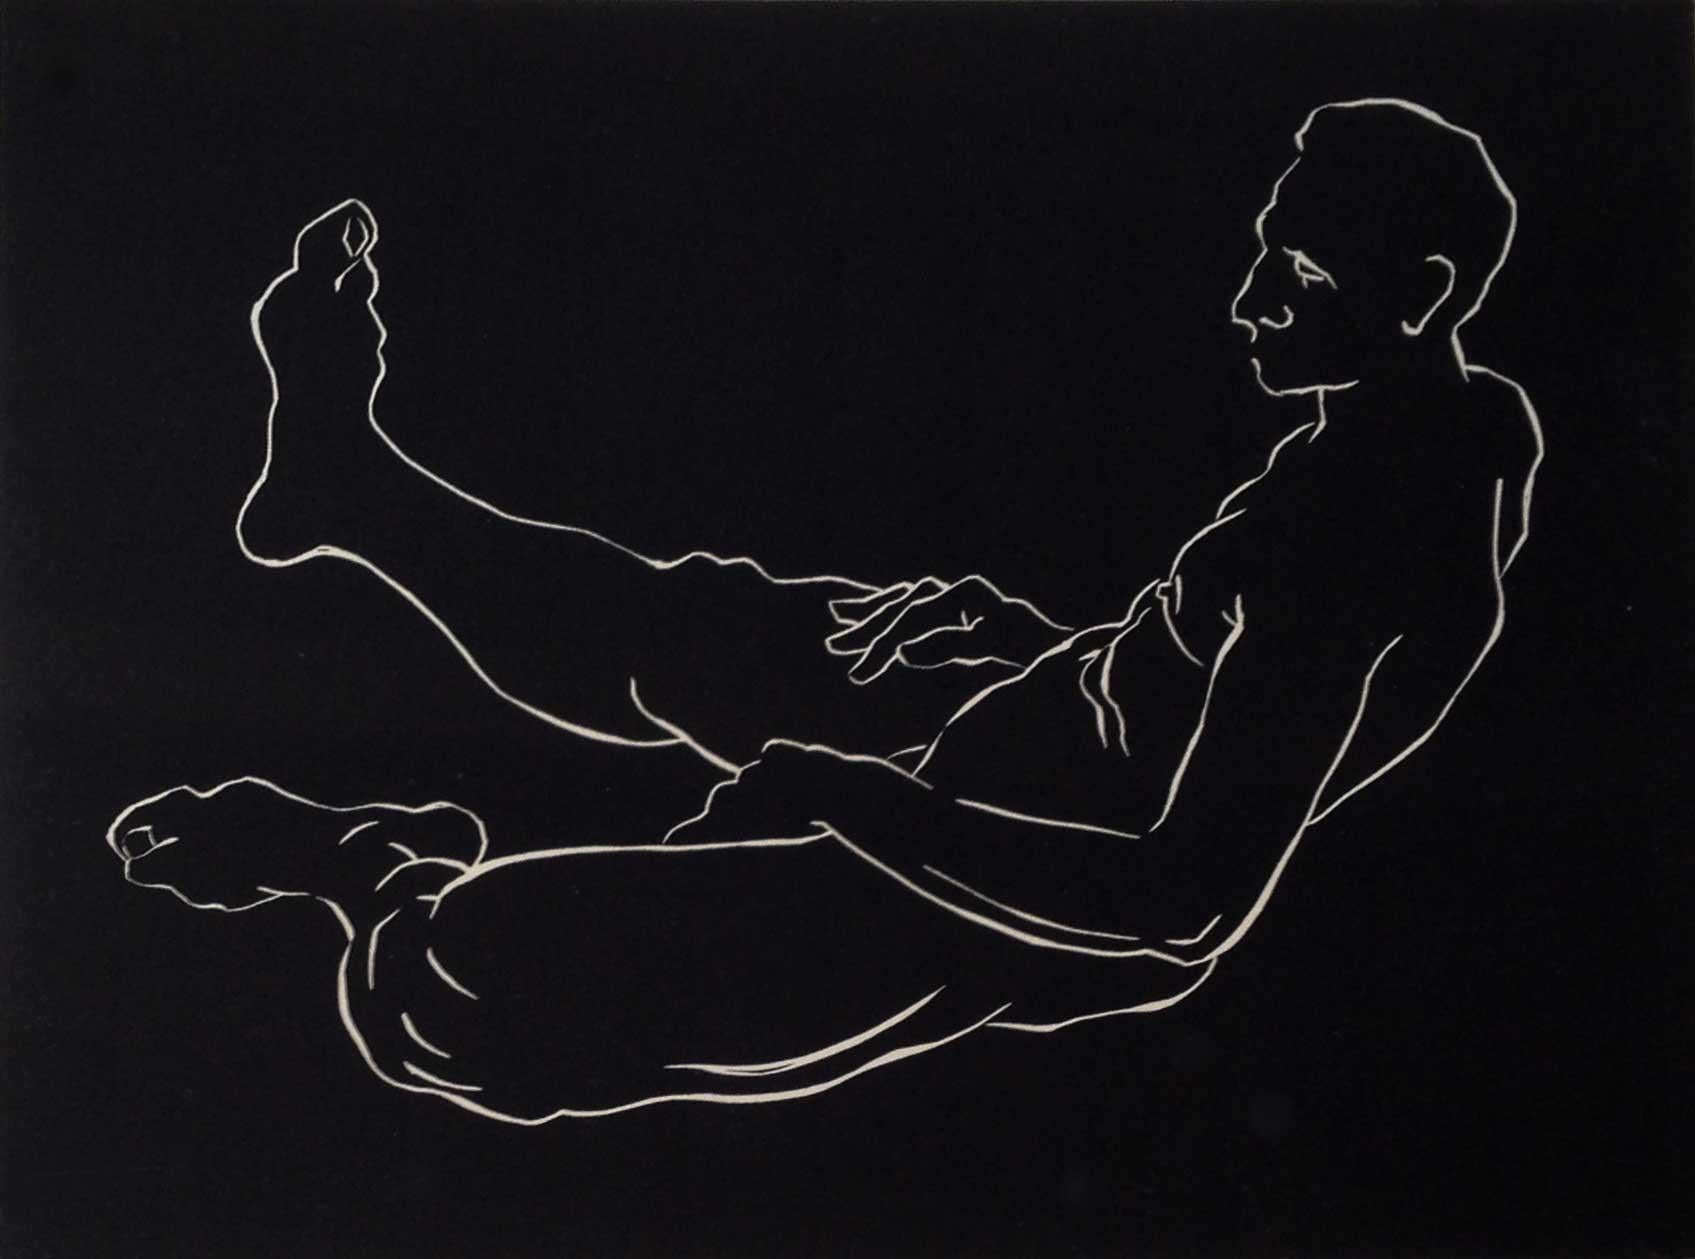 Signed and numbered linocut of a male nude reclining, from a series of 4 male and female nudes.

Reyes attended The School of the Art Institute of Chicago, where he received a Bachelor of Fine Arts degree in 1997. After moving back to California, he